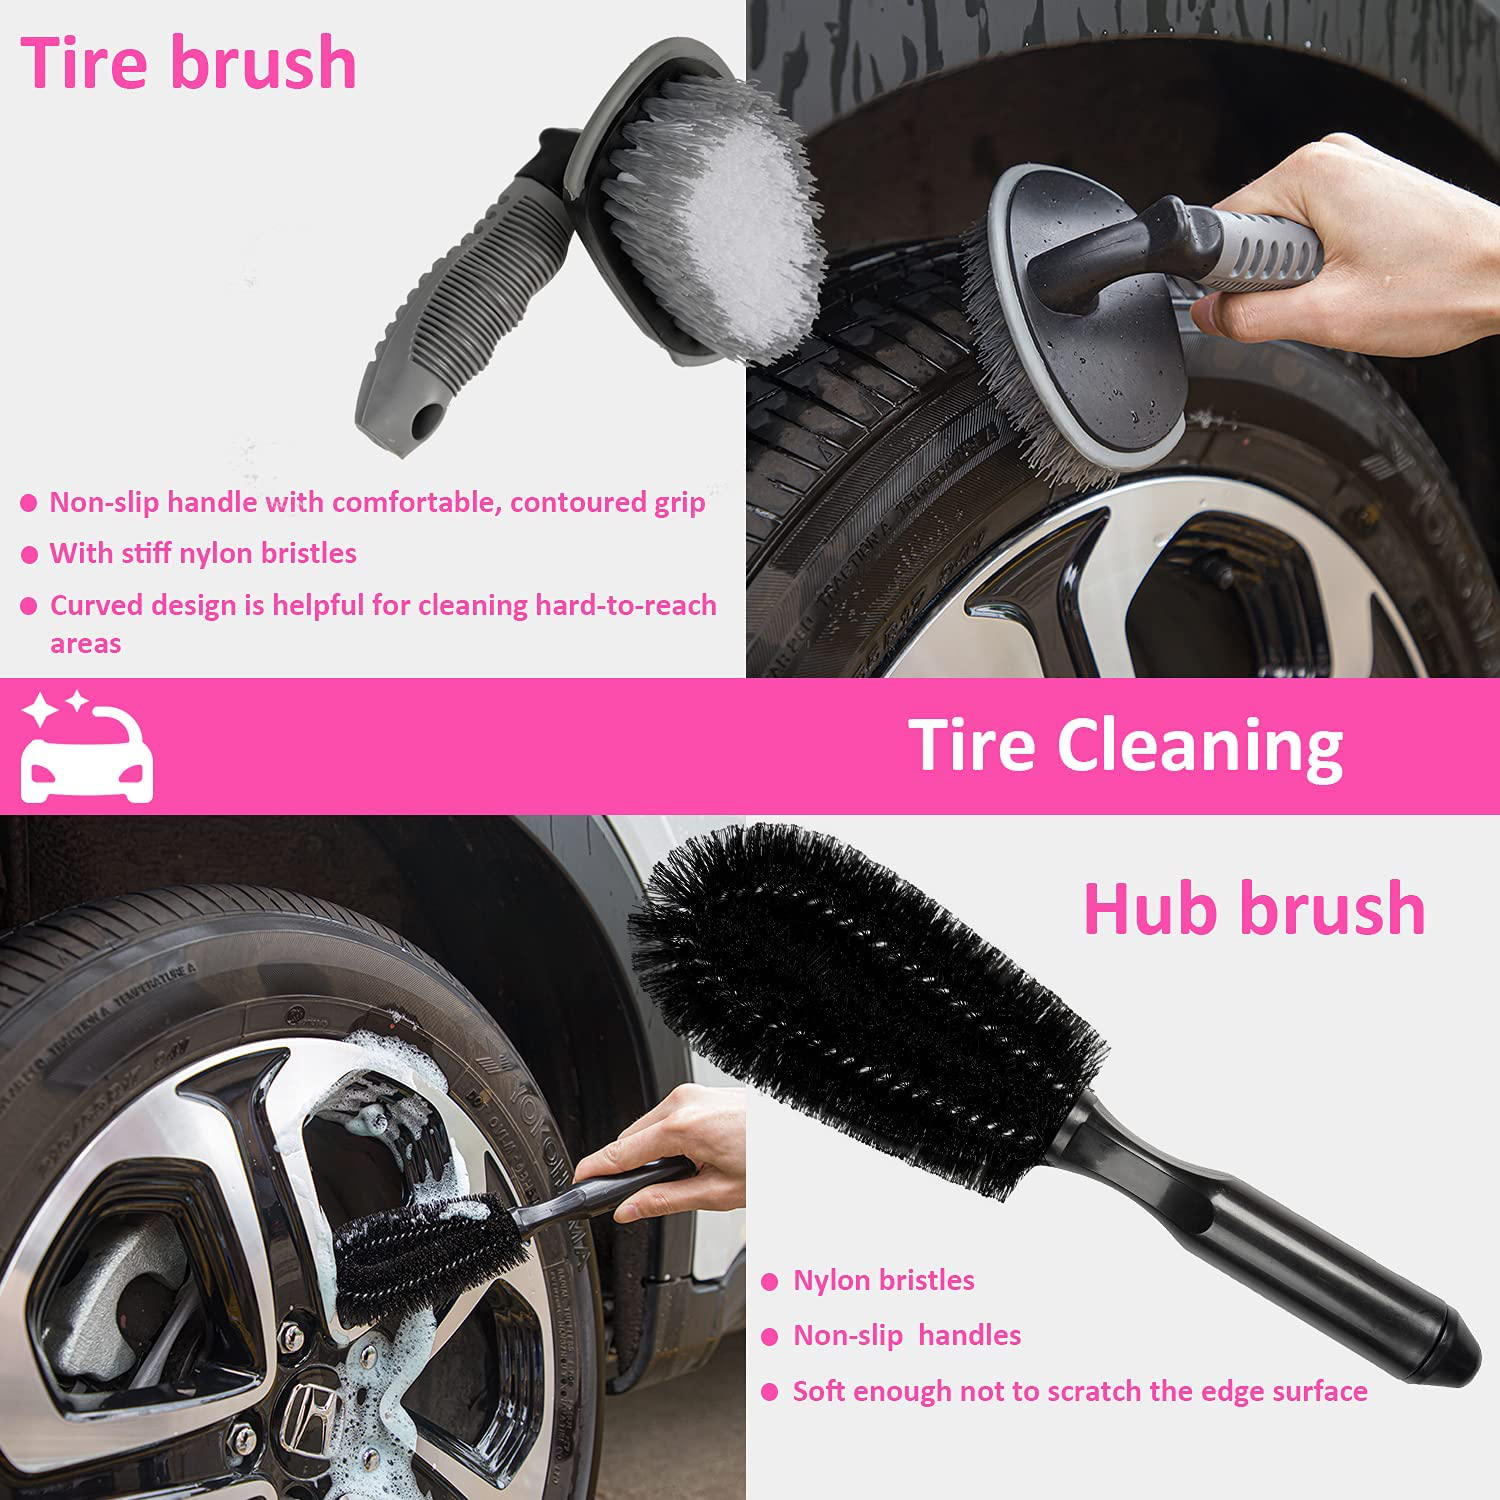 HLWDFLZ 31pcs Car Cleaning Kit, Pink Car Wash Kit and Detailing kit - Car Detailing Brushs, Microfiber Cleaning Cloth, Tire Brush, Window Scraper for Cleaning Car Interior Exterior